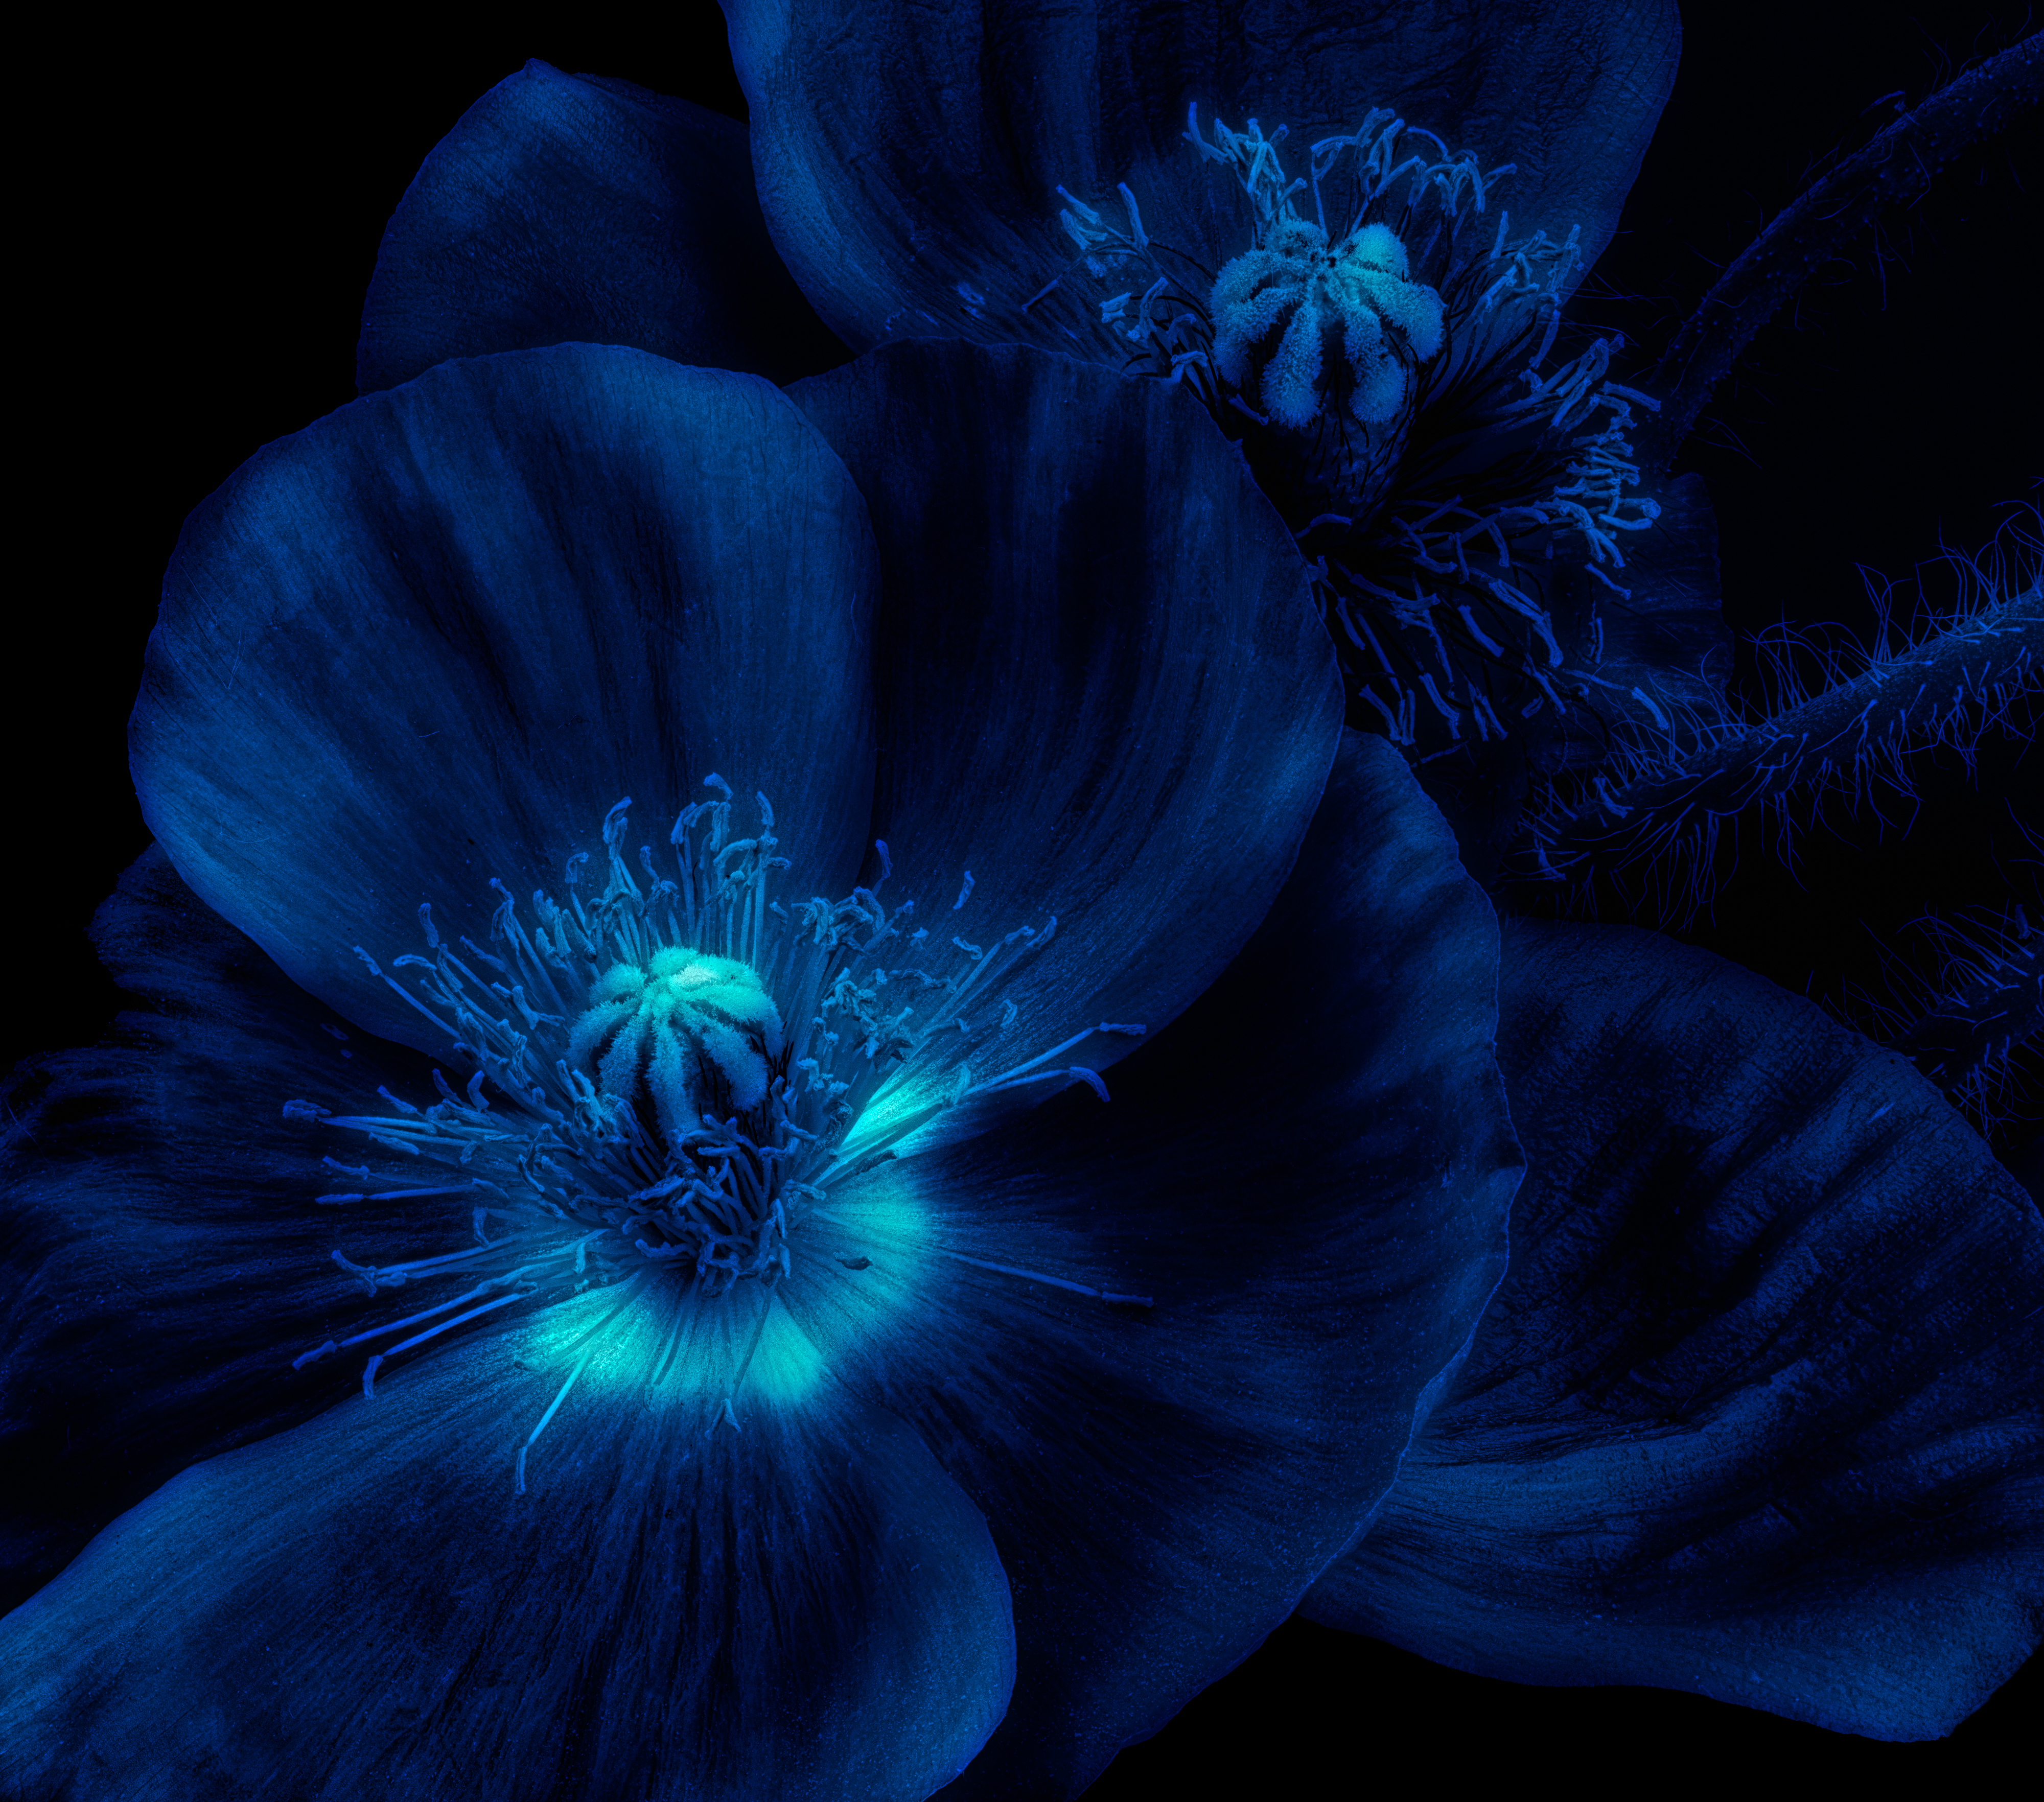 Glowing flowers for Moonlit